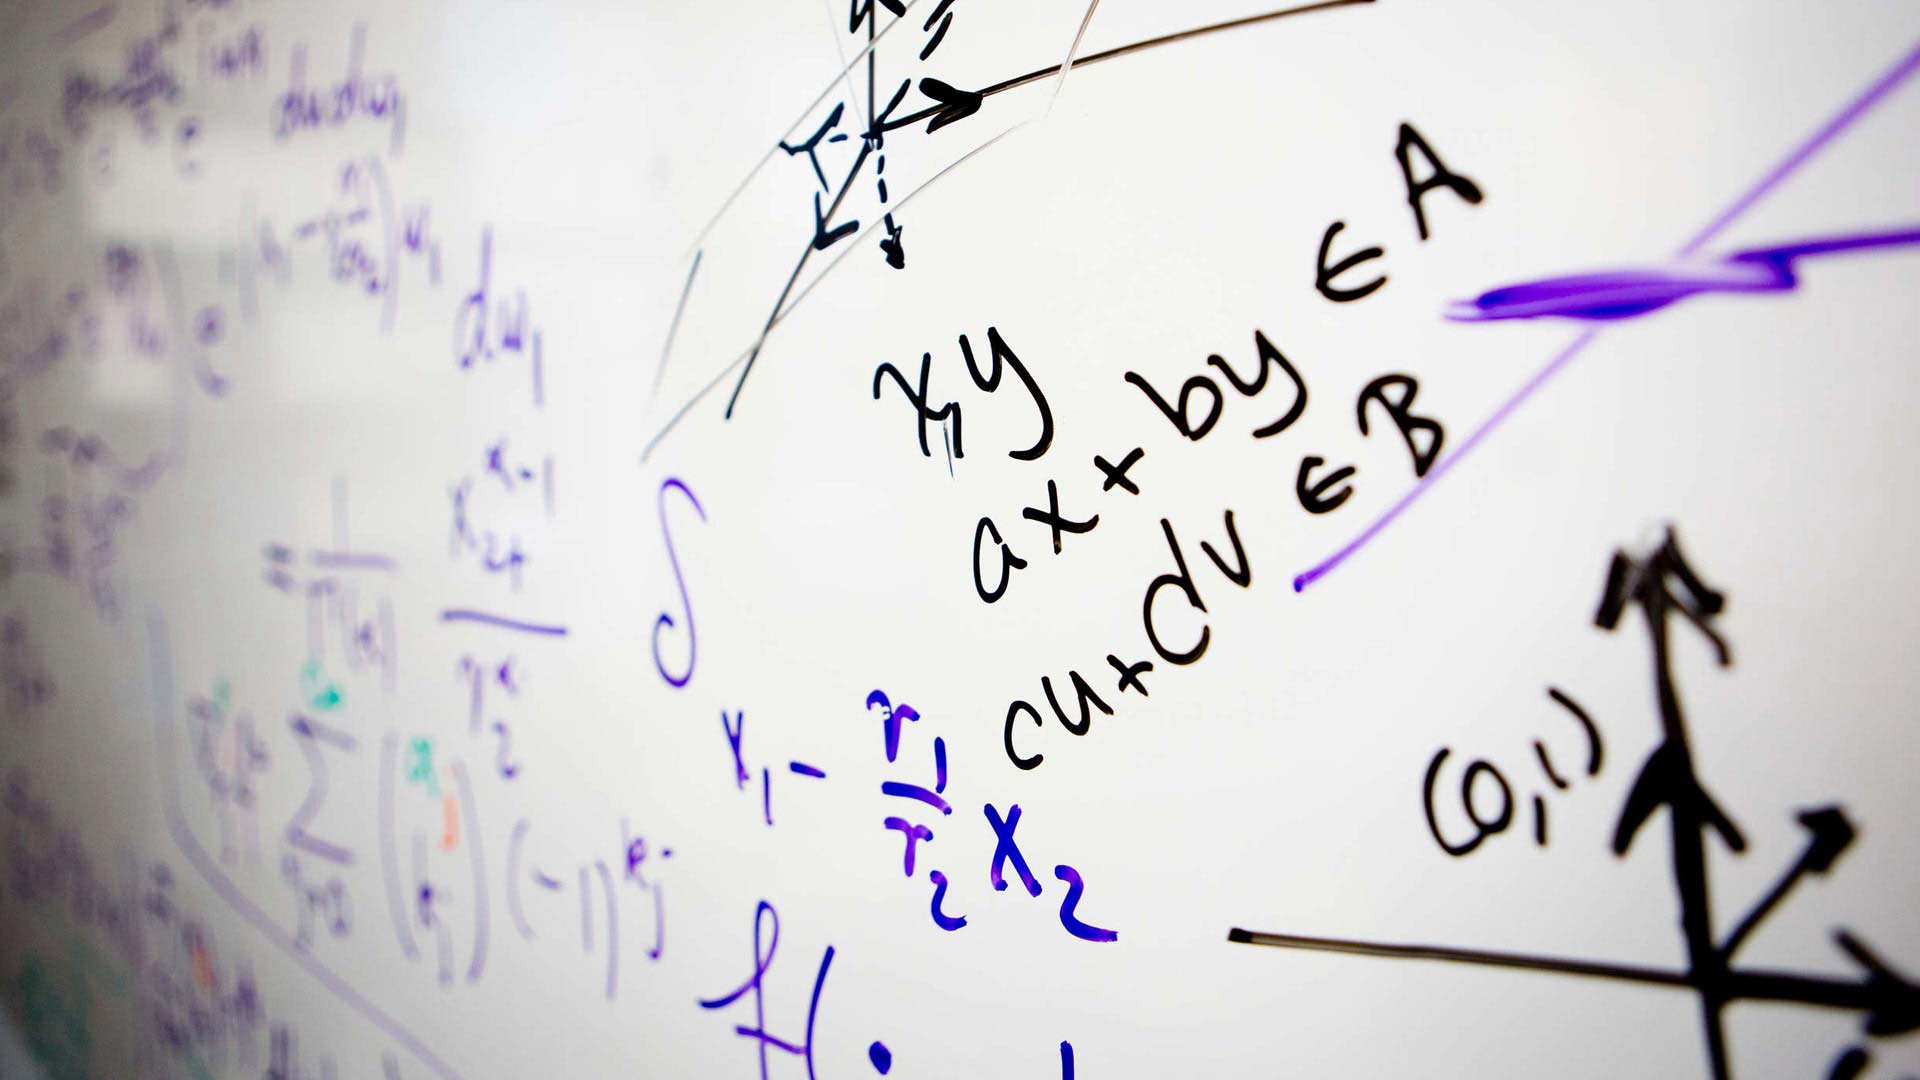 Mathematical equations on a whiteboard. 